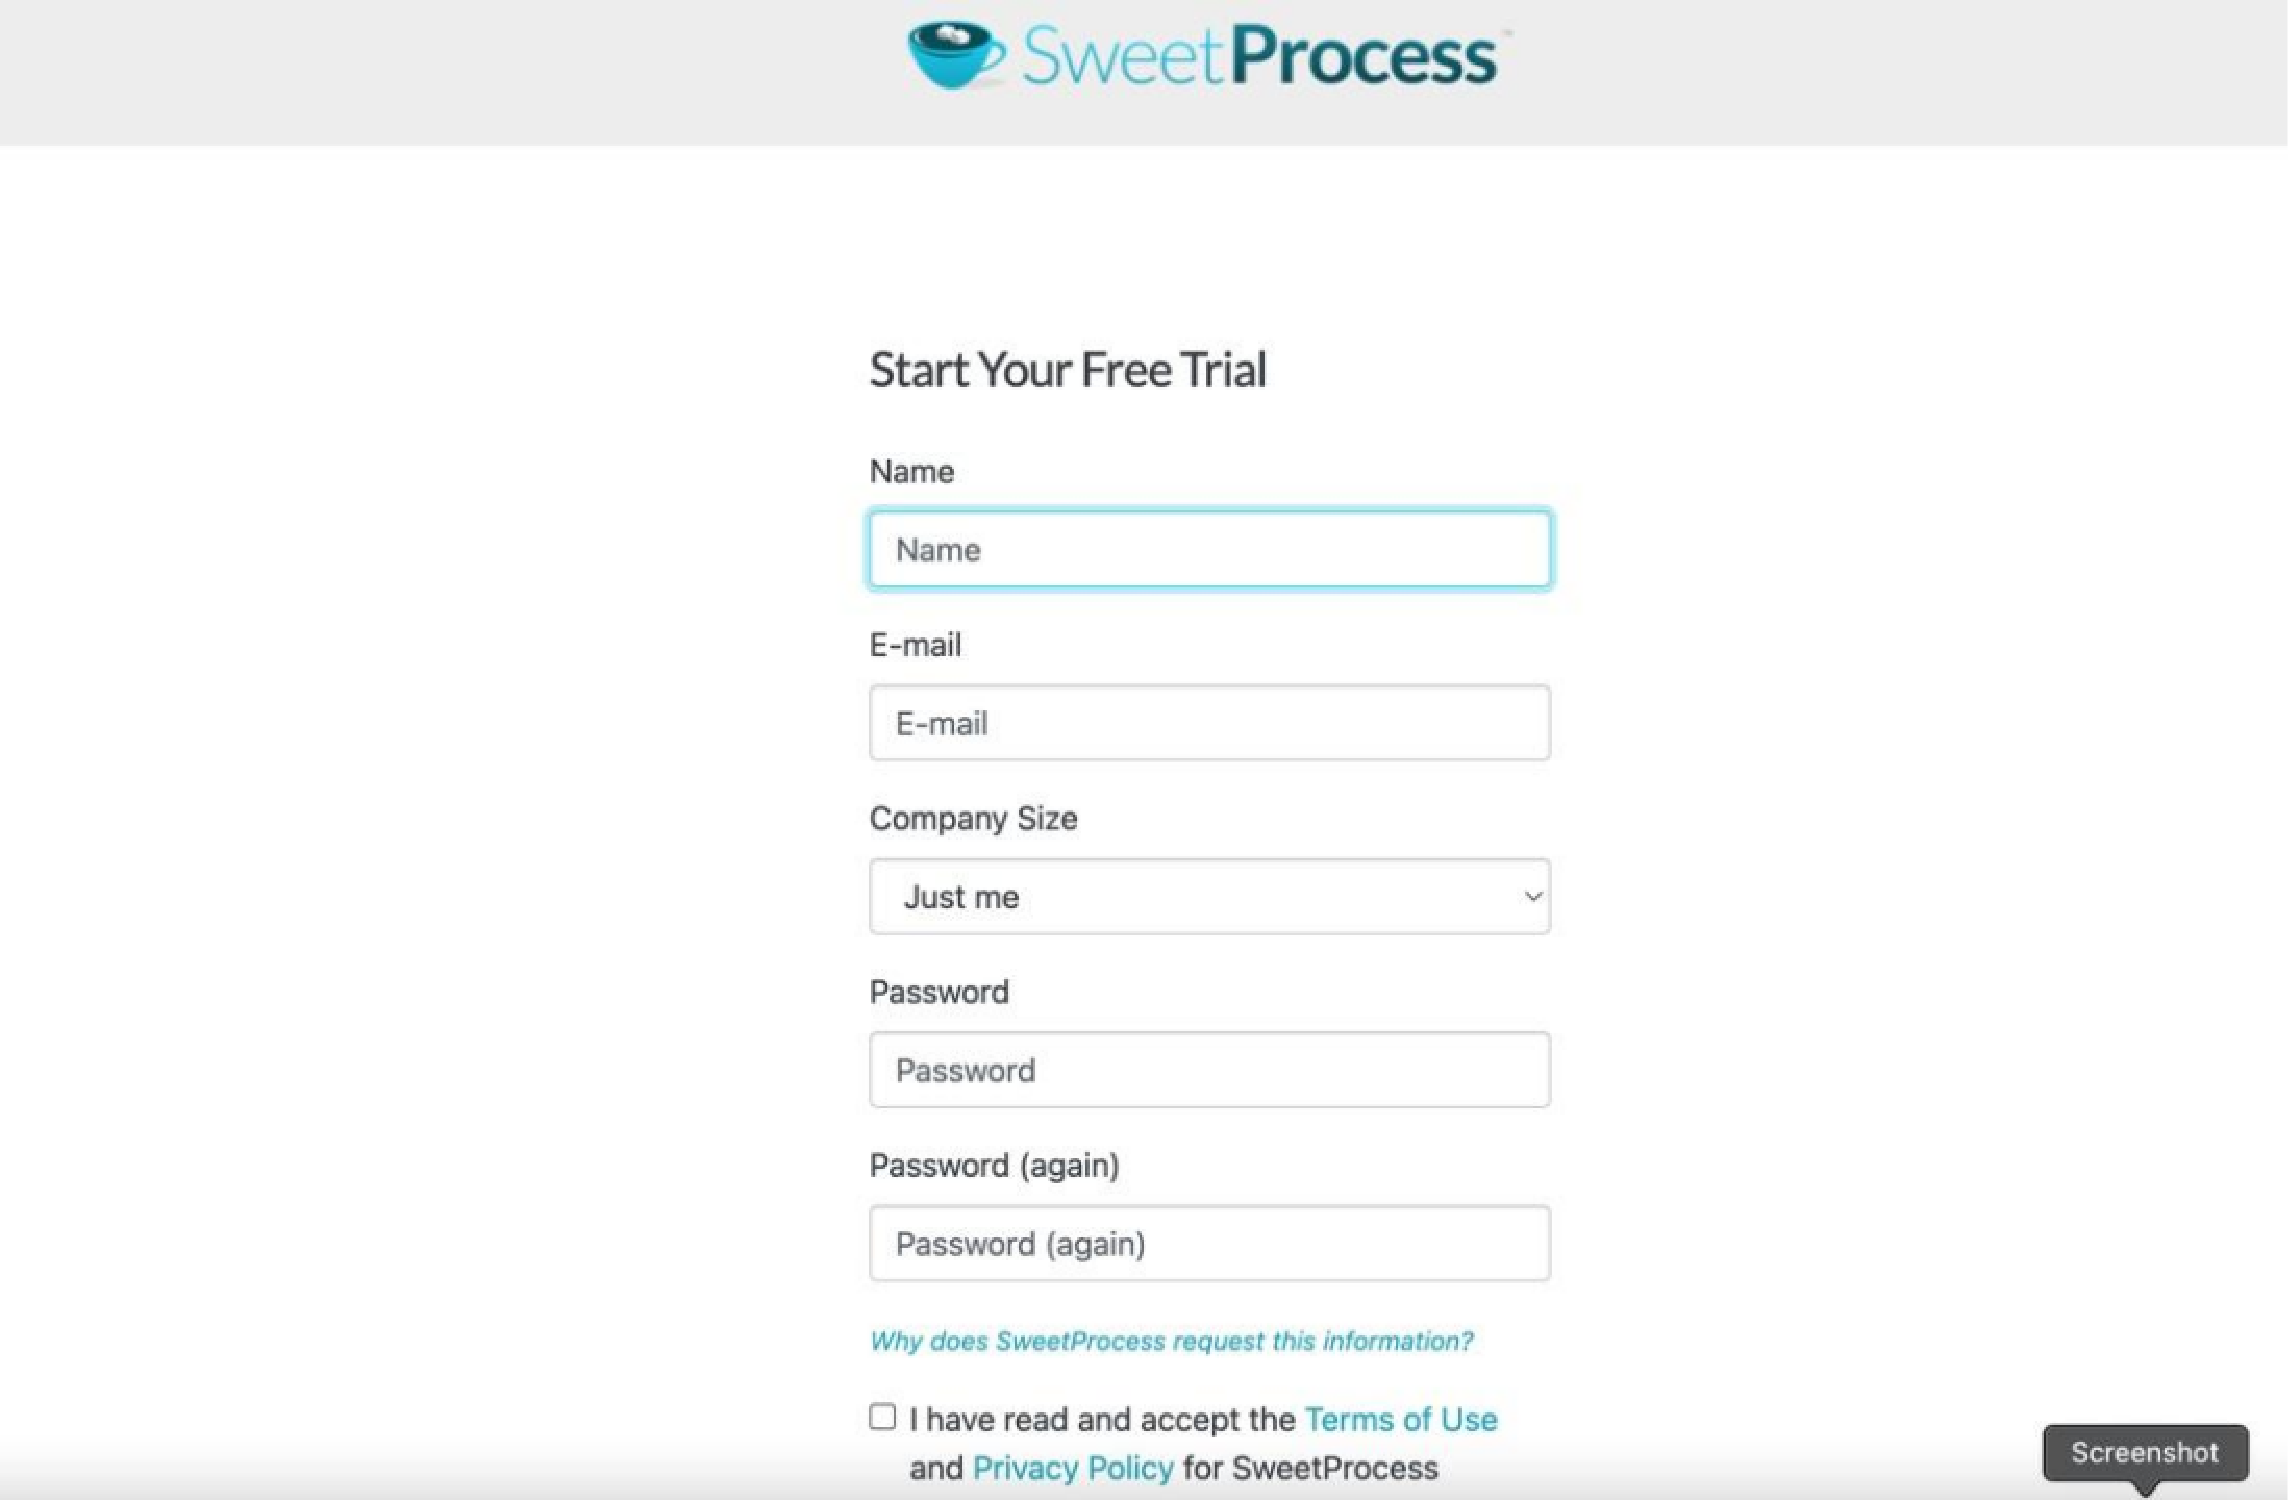 Sign up for SweetProcess to get started.